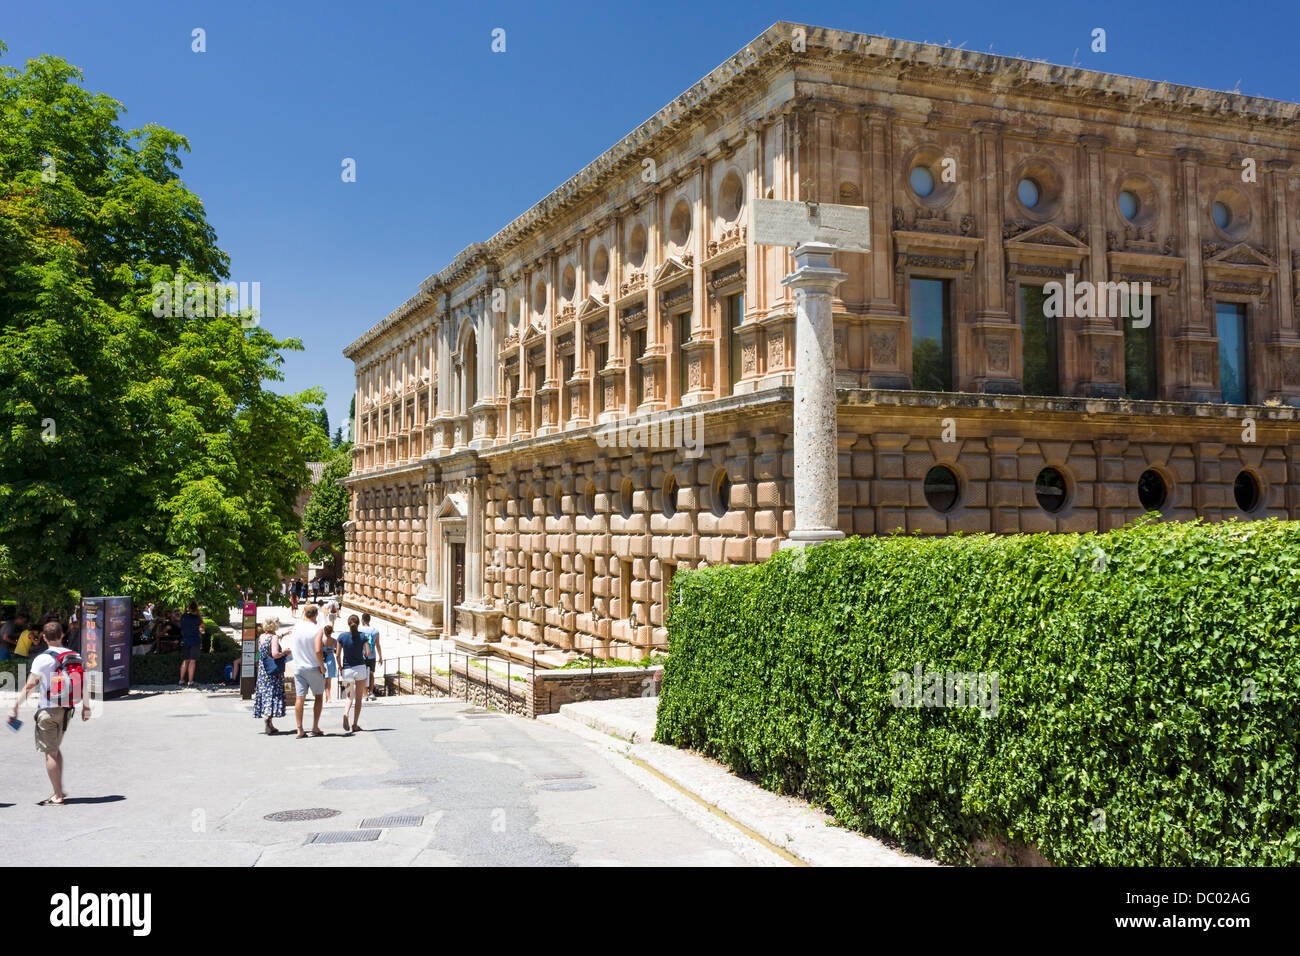 The beautiful palace and gardens at Alhambra in Granada, Andalusia, southern Spain. Stock Photo